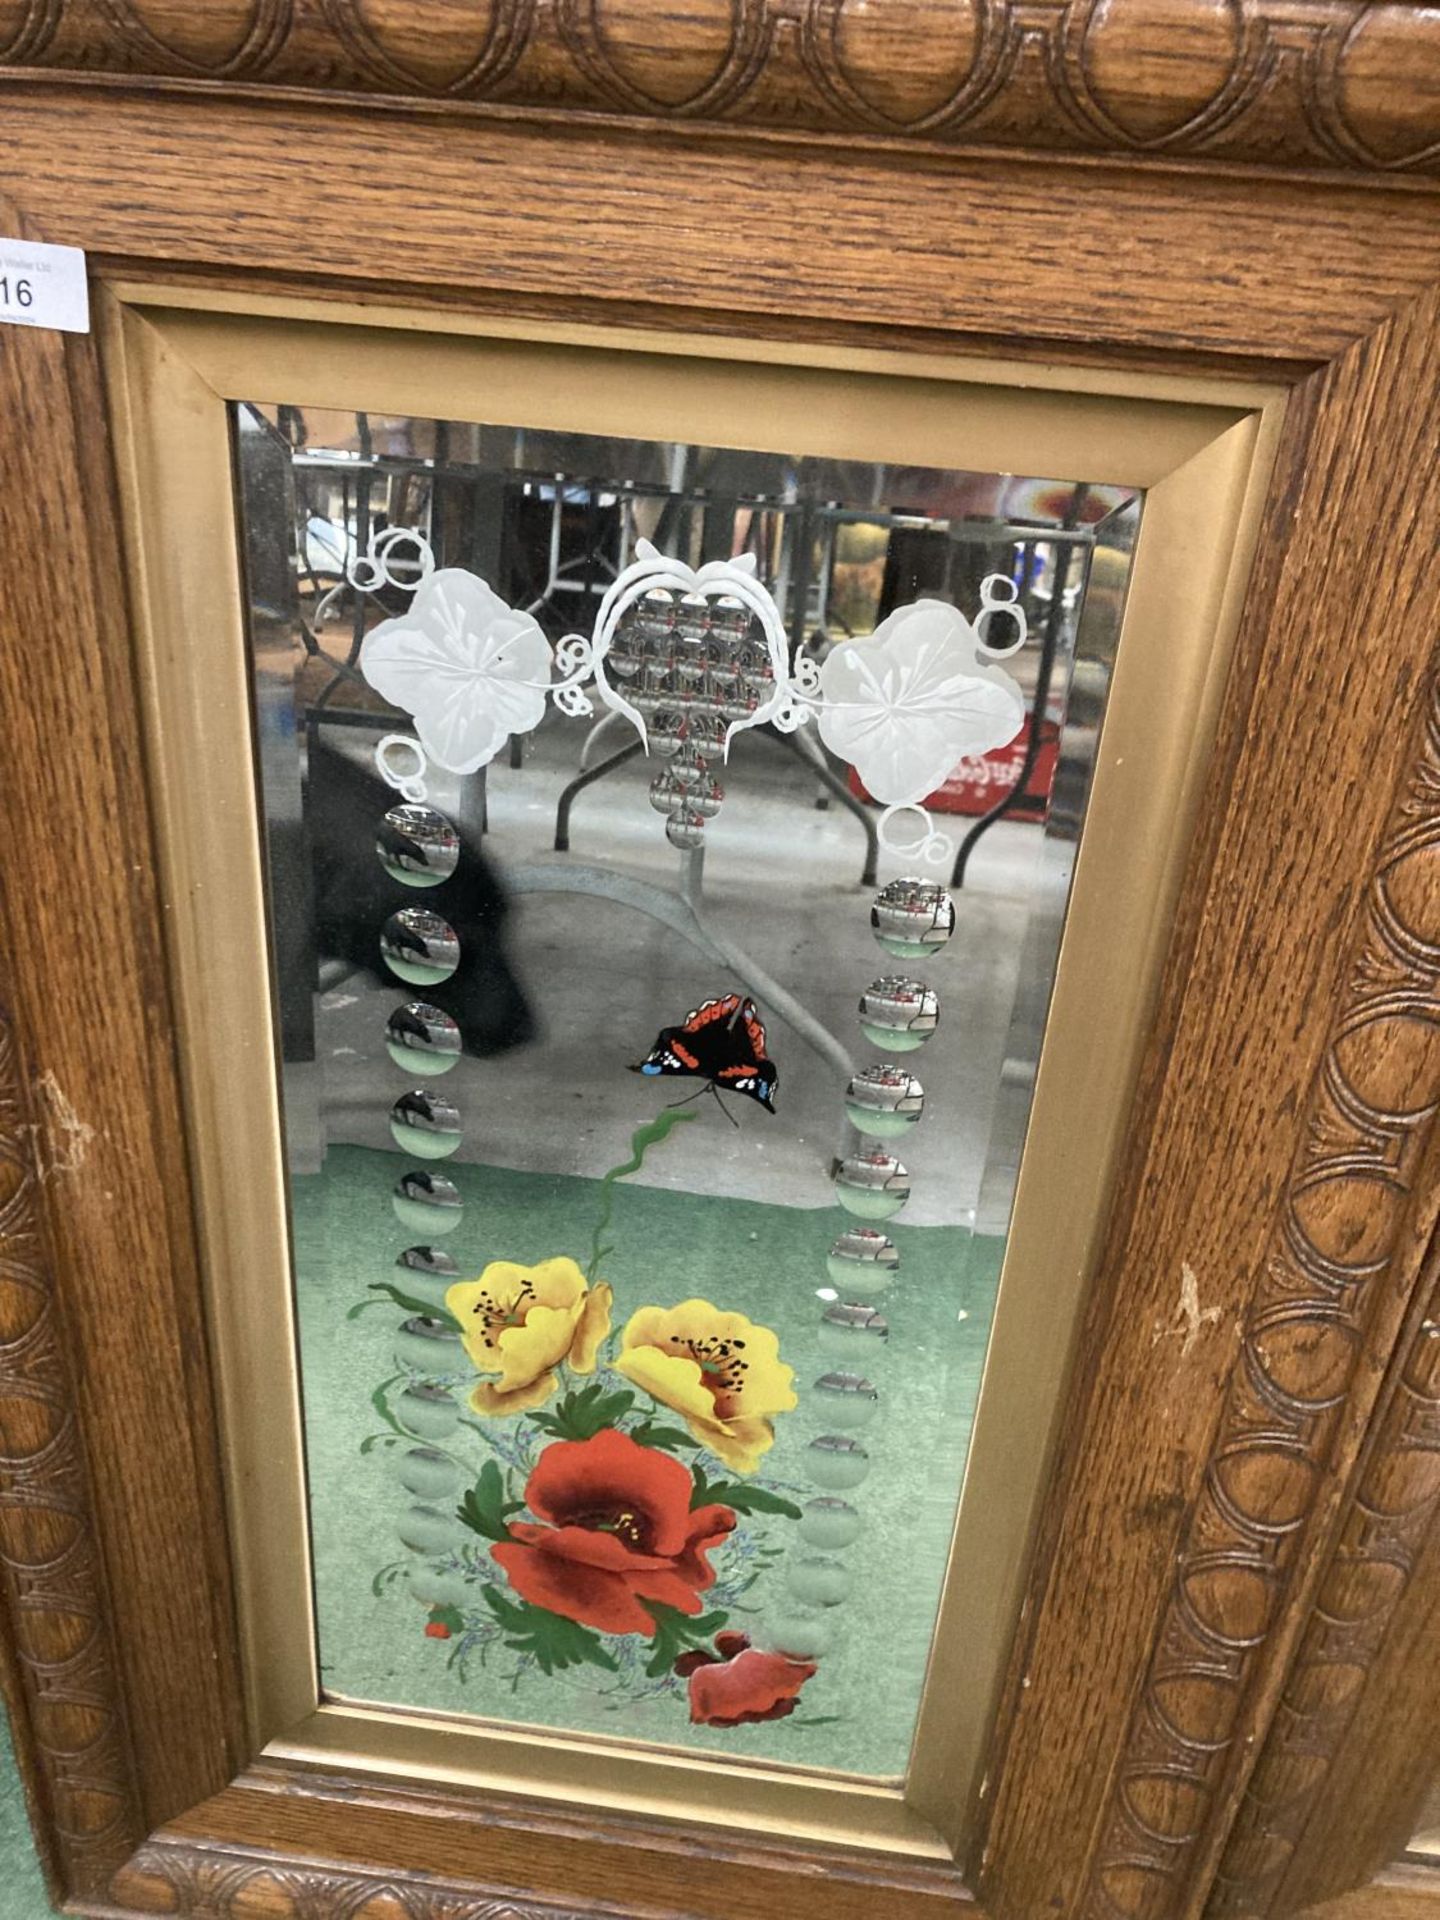 TWO OAK FRAMED DECORATIVE MIRRORS WITH FLOWERS AND BUTTERFLIES 20" X 33" - Image 3 of 3